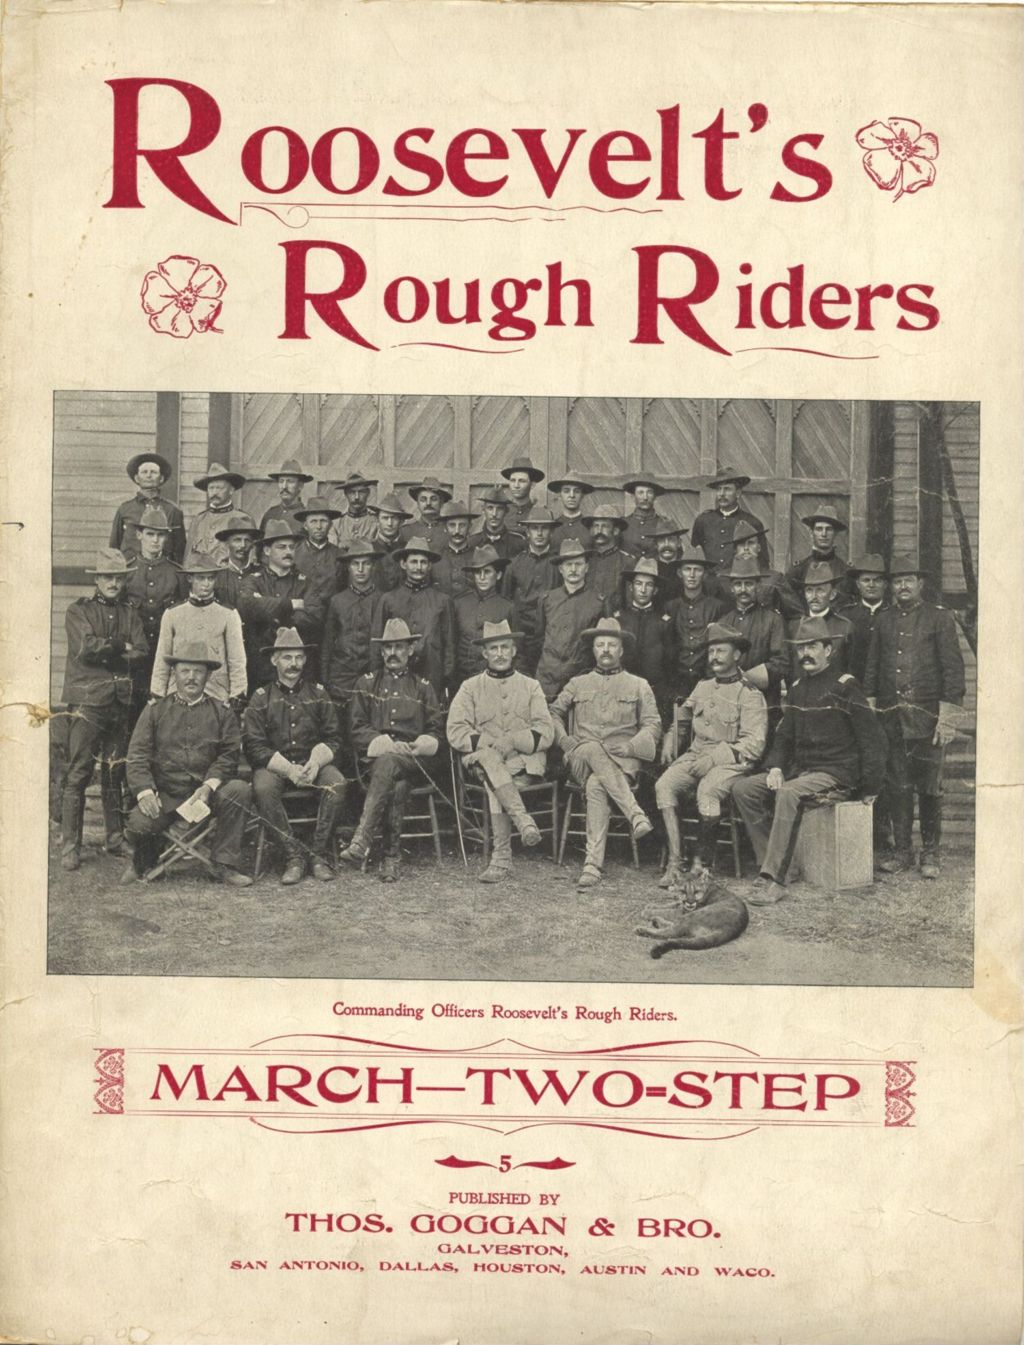 Roosevelt's Rough Riders (March - Two Step)